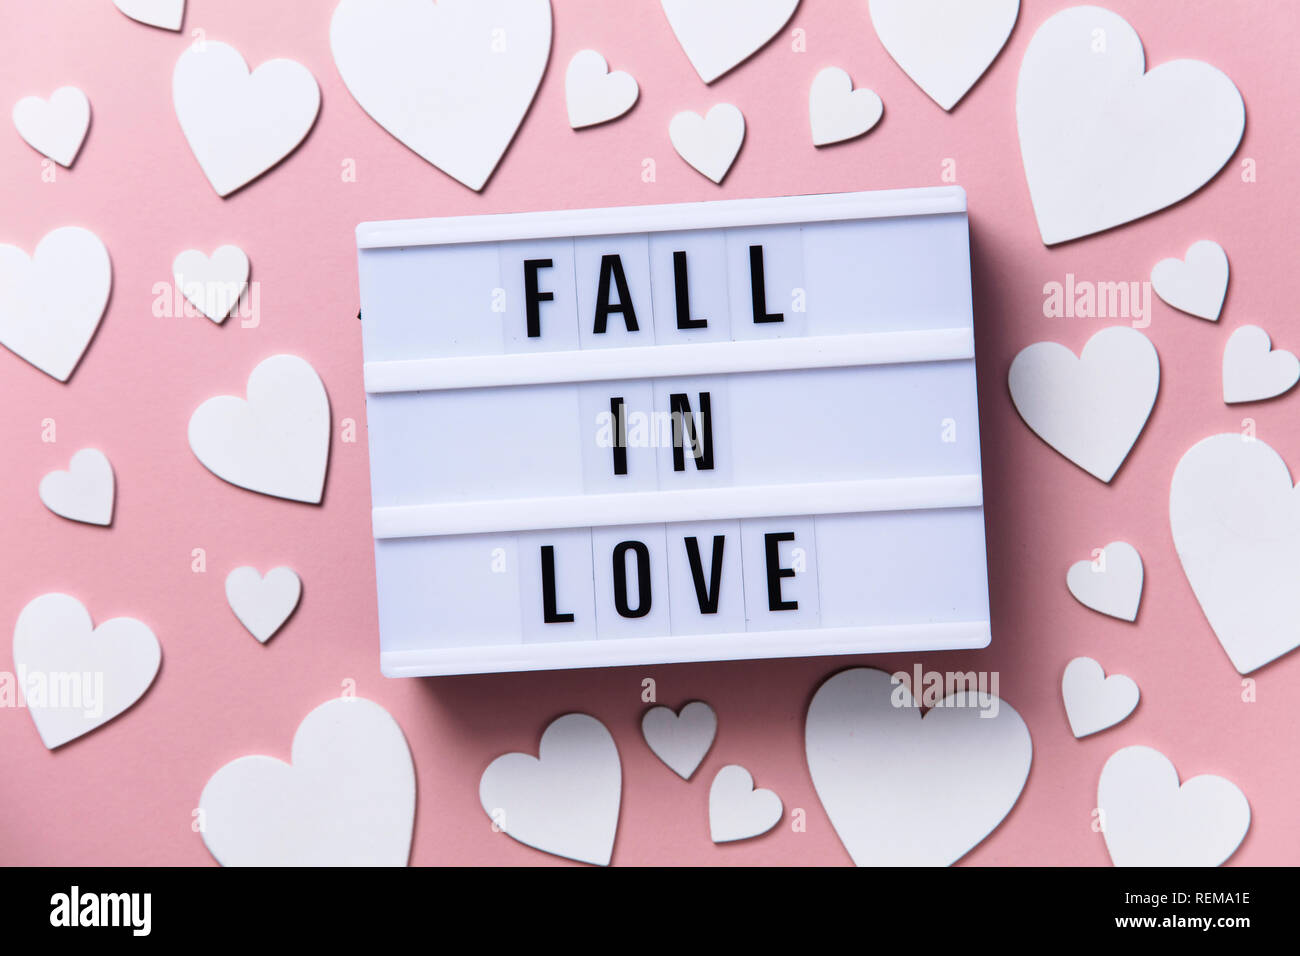 Fall in Love lightbox message with white hearts on a pink background Stock Photo